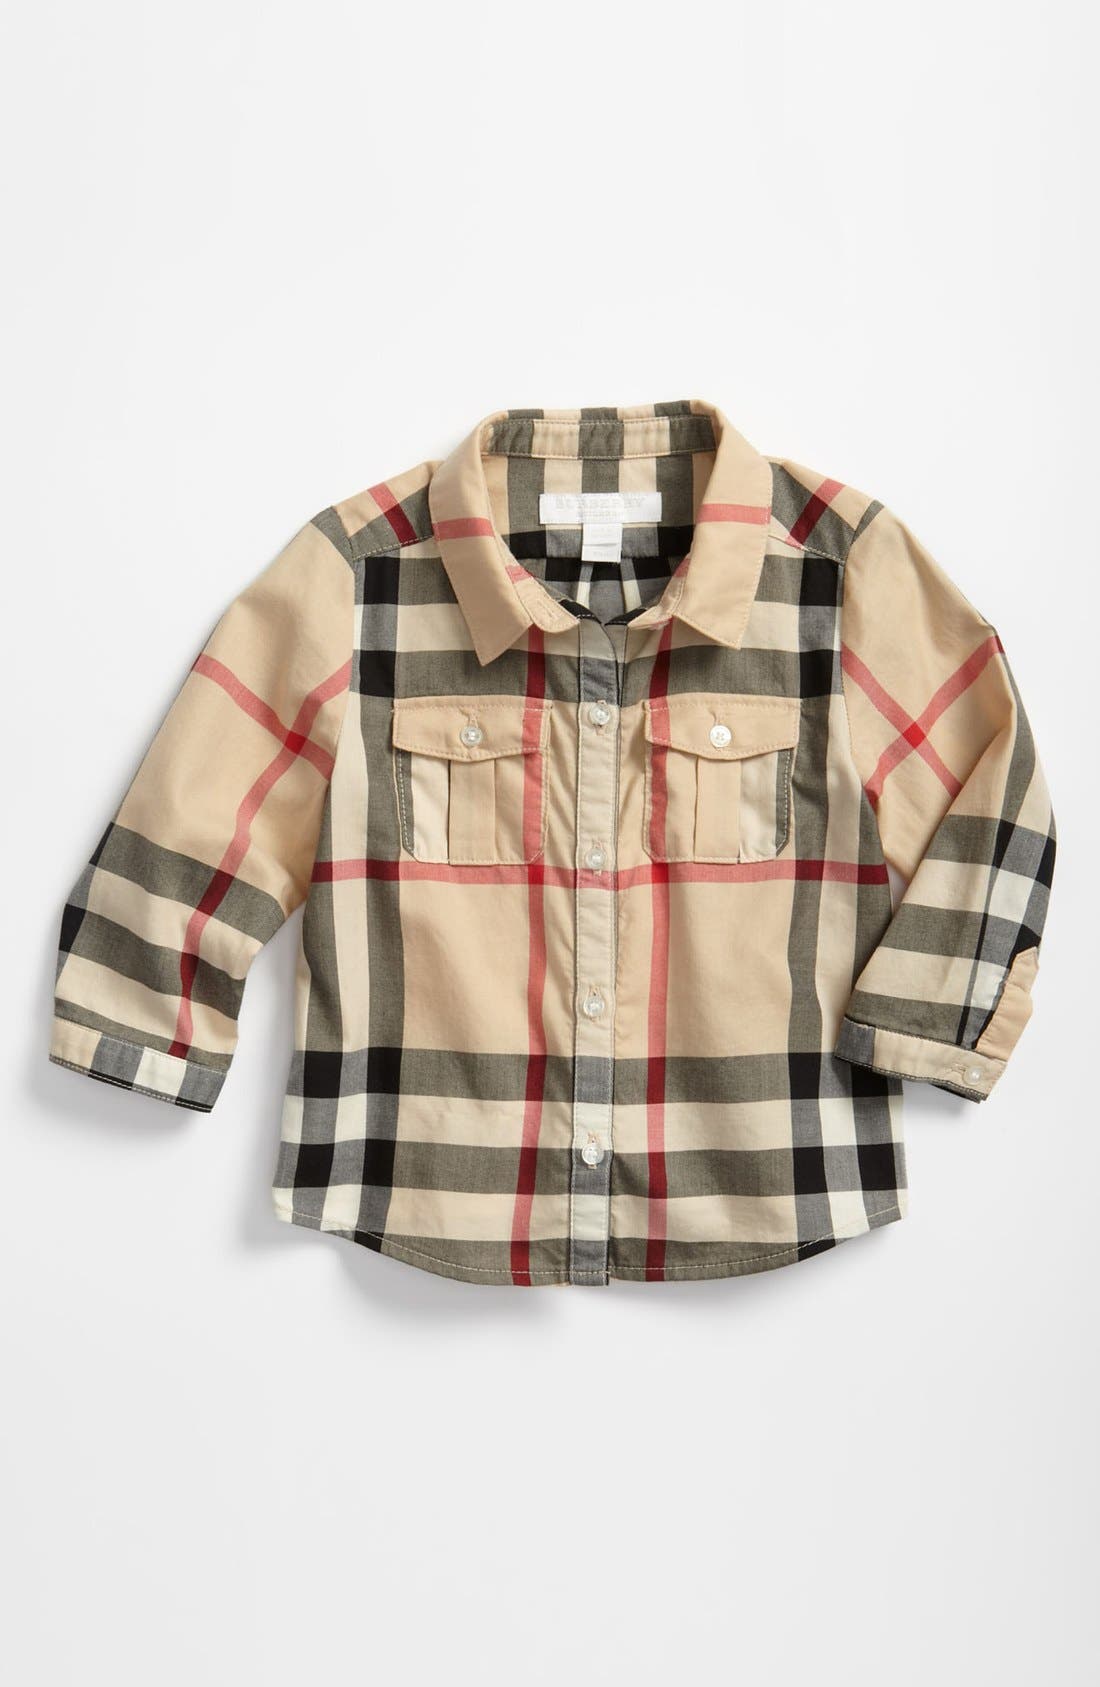 burberry shirt for baby boy